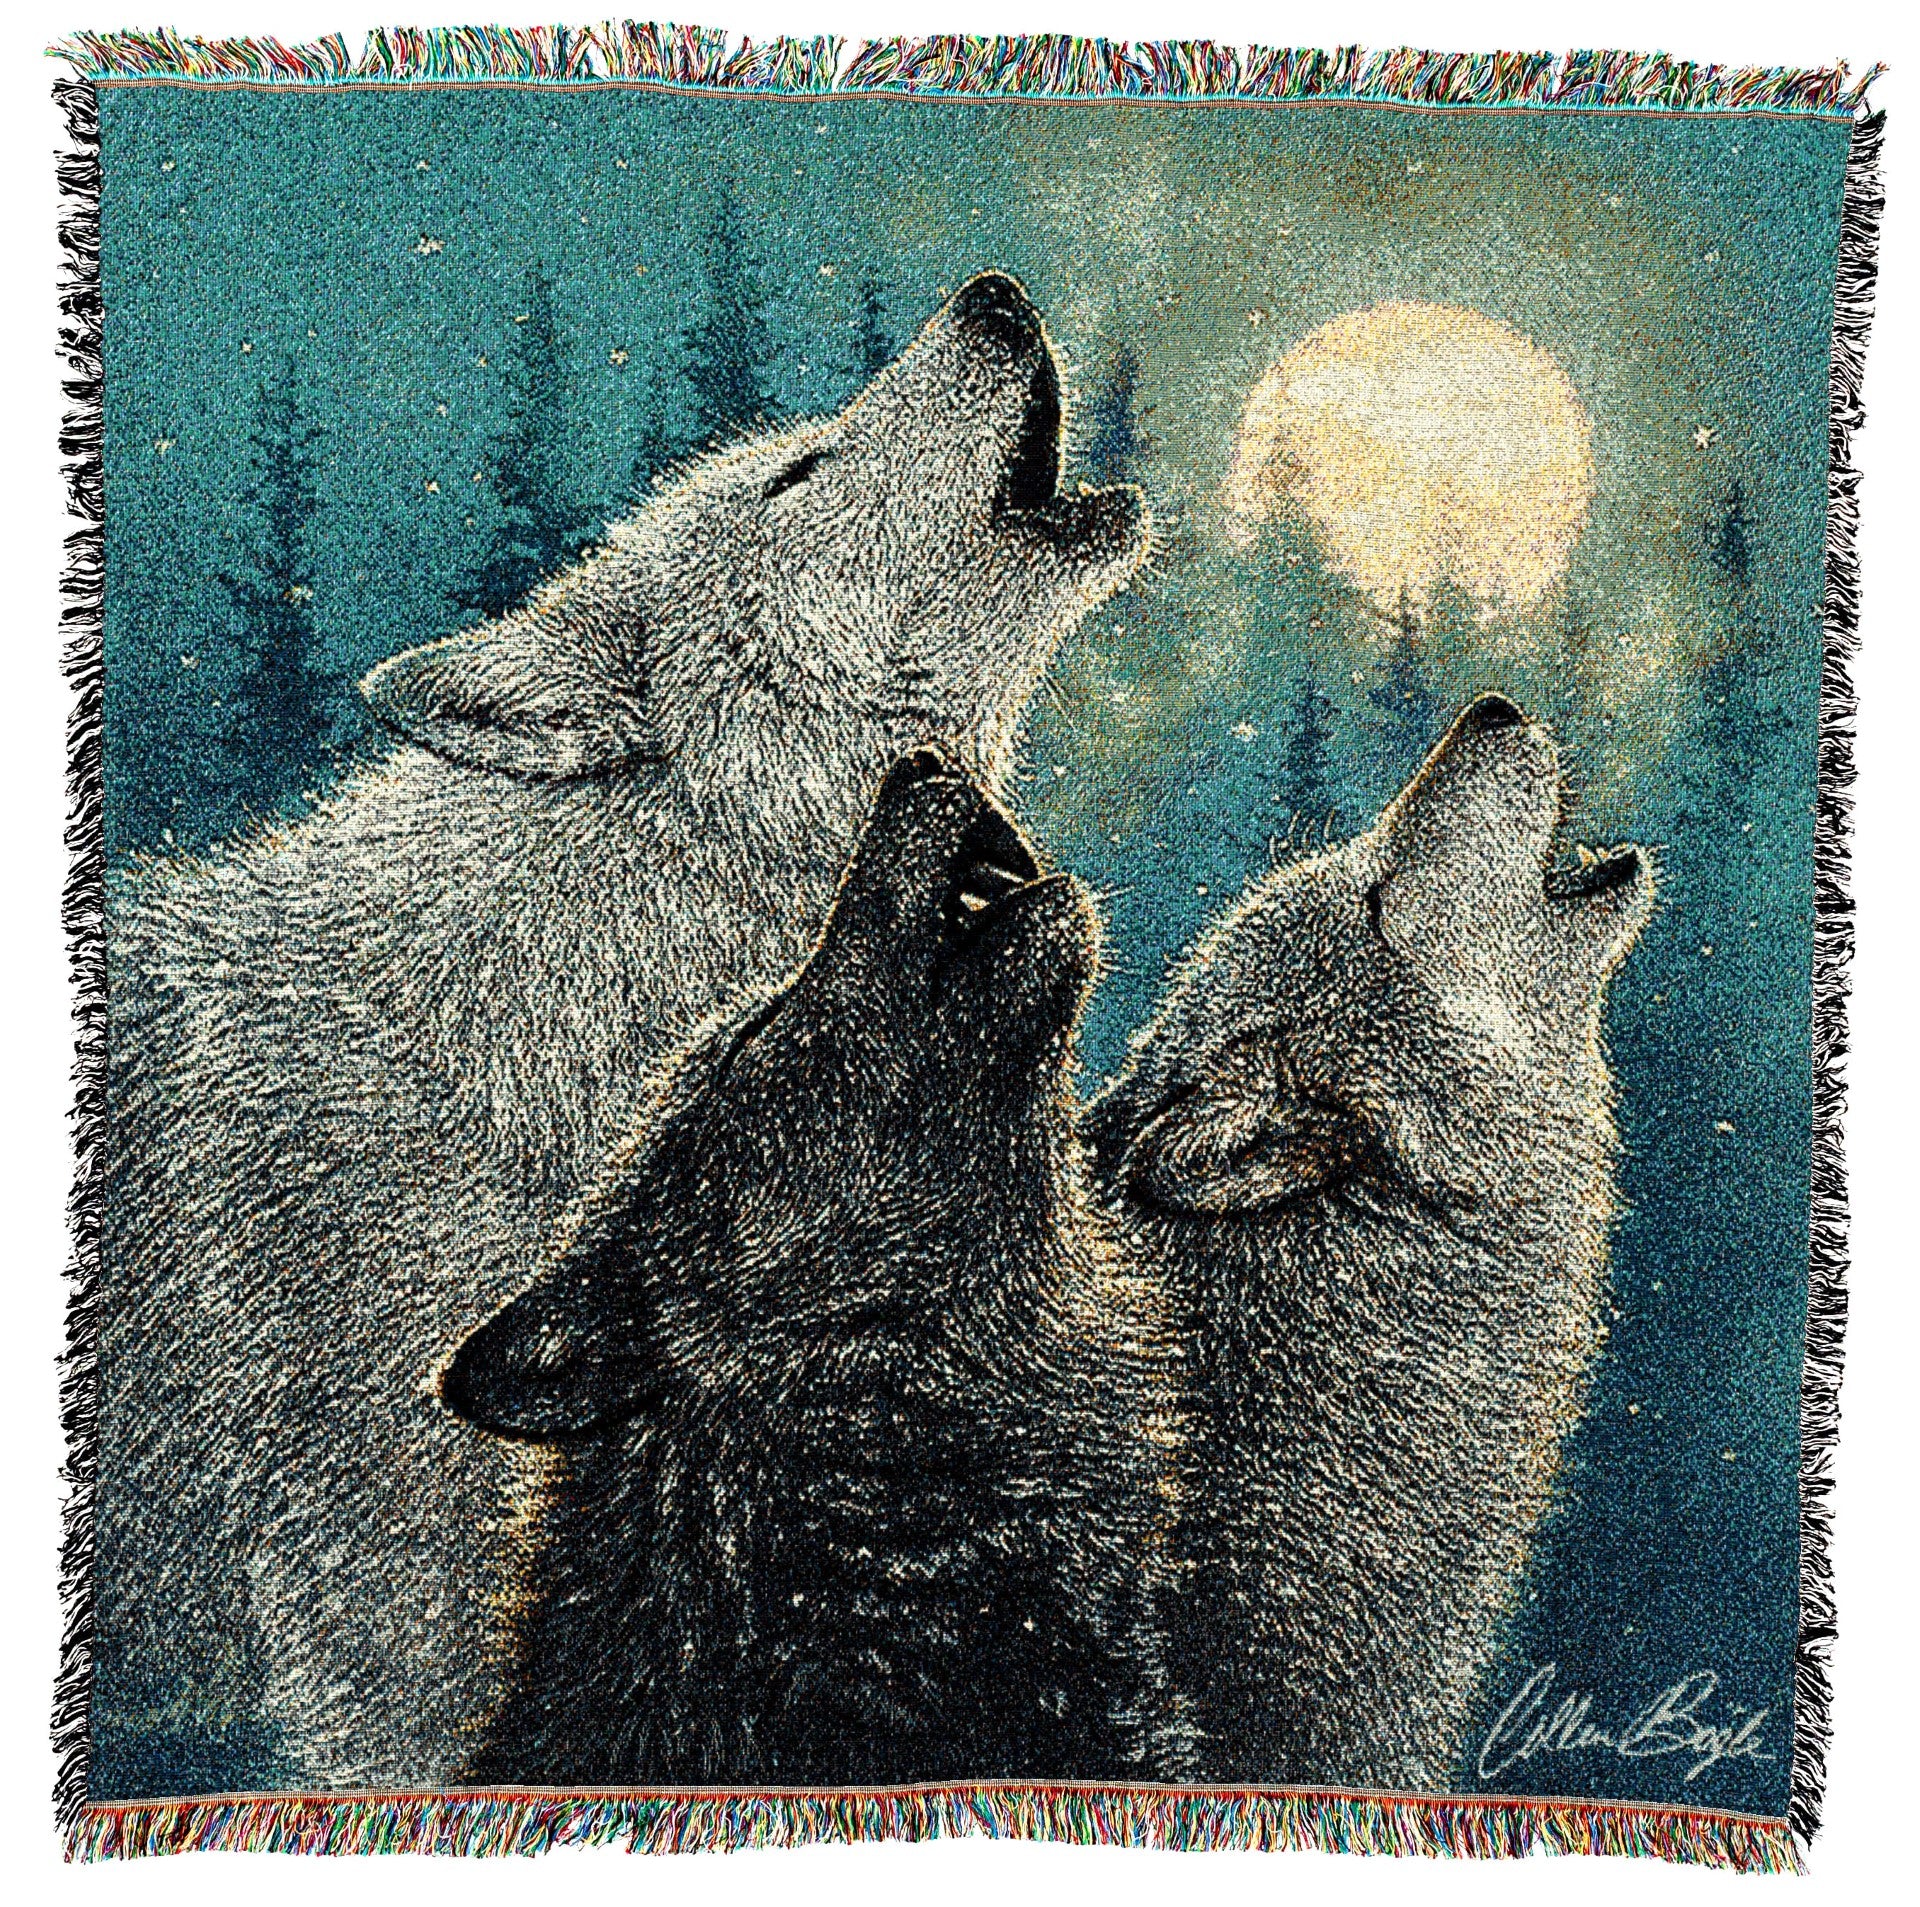 In Harmony Wolves Wolling at the Moon - Collin Bogle - Lap Square Cotton Woven Blanket Throw - Made in the USA 54"x54"